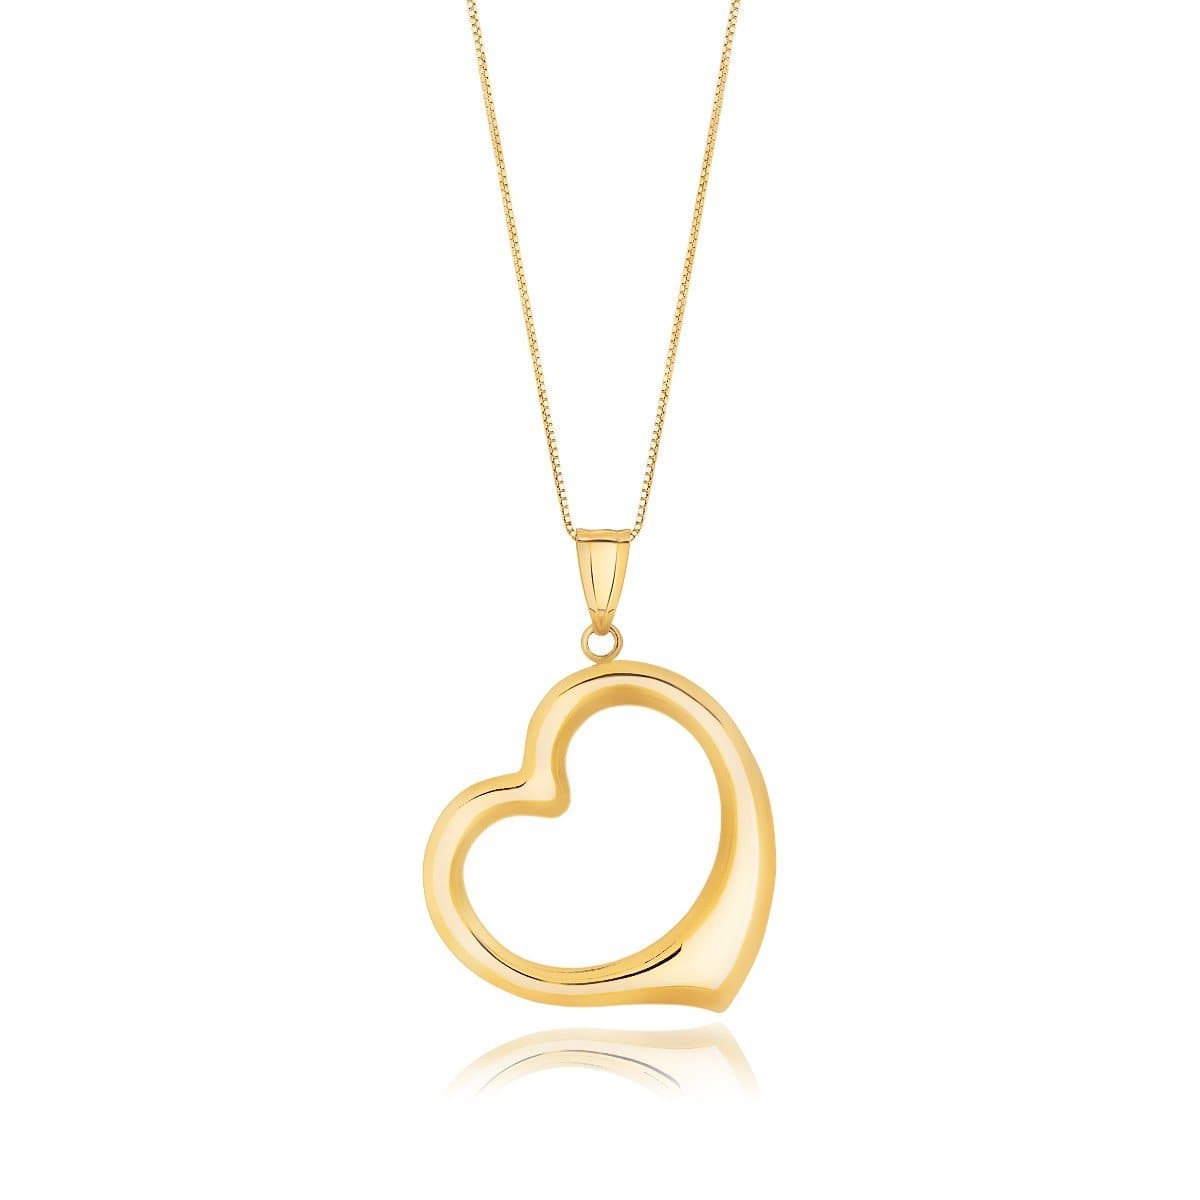 14k Yellow Gold Floating Heart Drop Pendant Necklace